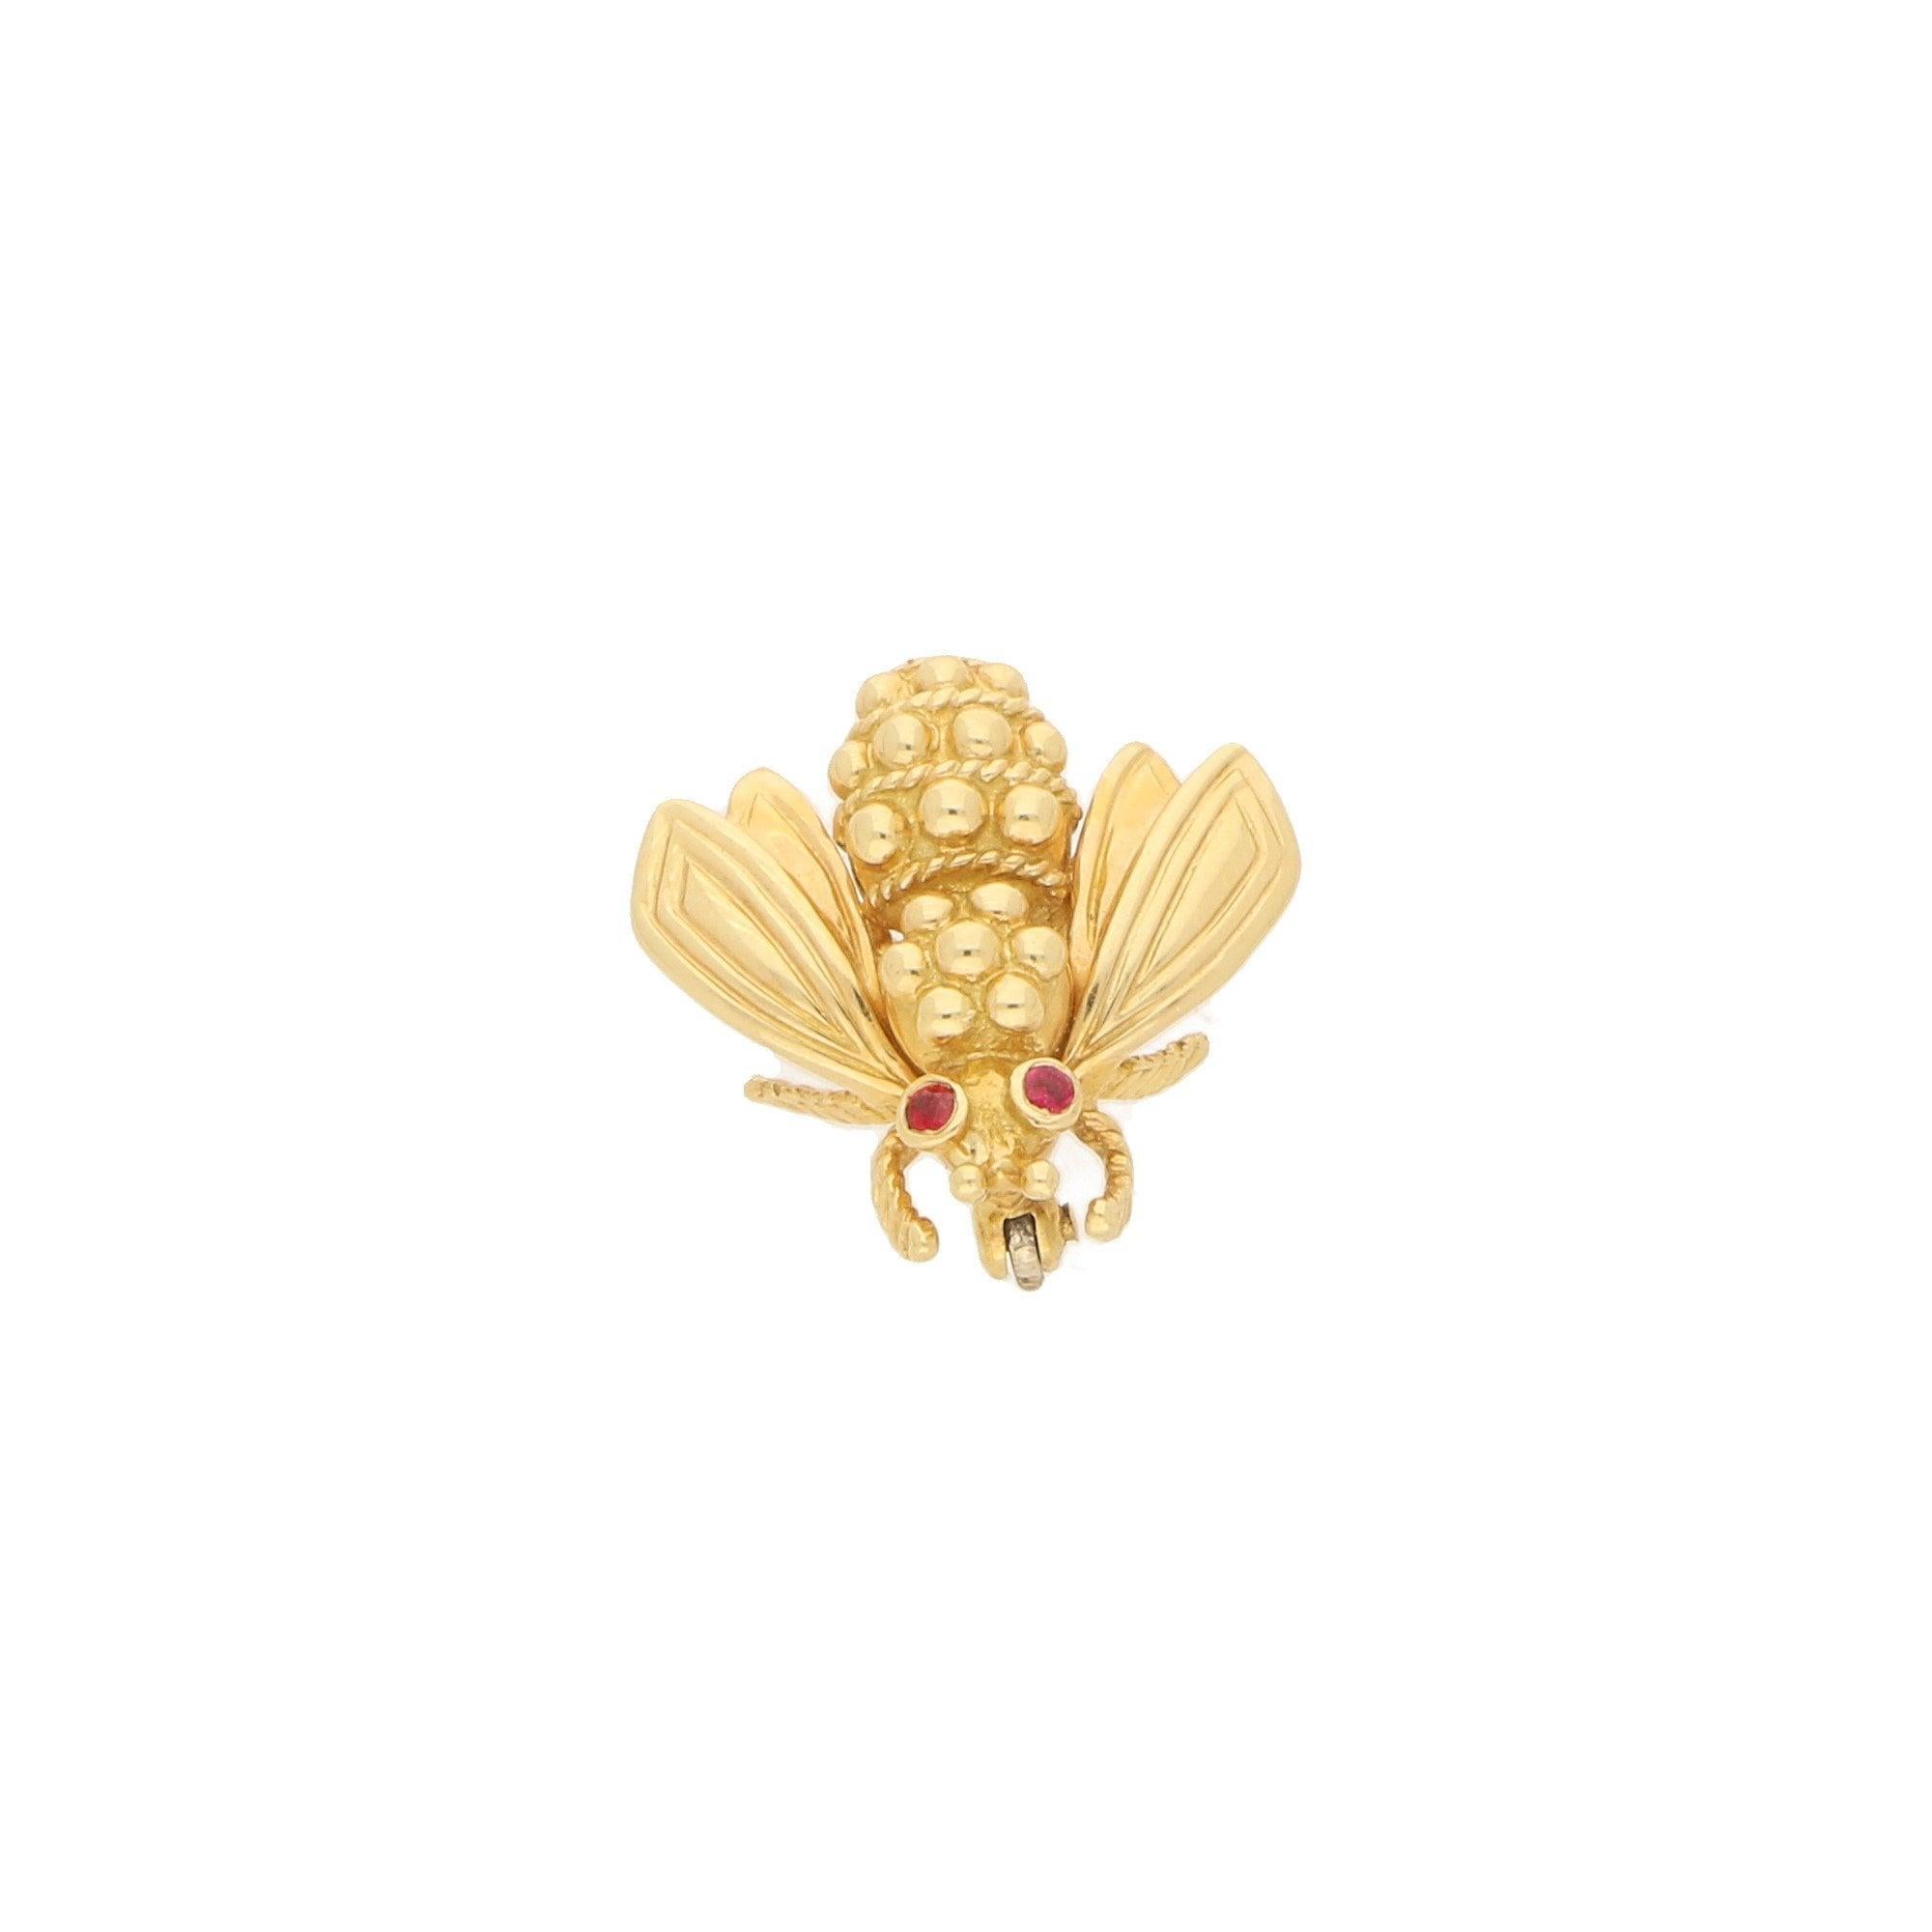 A vintage Tiffany & Co. ruby-eyed queen bee brooch in 18-karat yellow gold, circa 1960. The brooch is designed as a stylized queen bee in yellow gold with the body composed of gold beads within ropework detailing.
The textured head is accented with